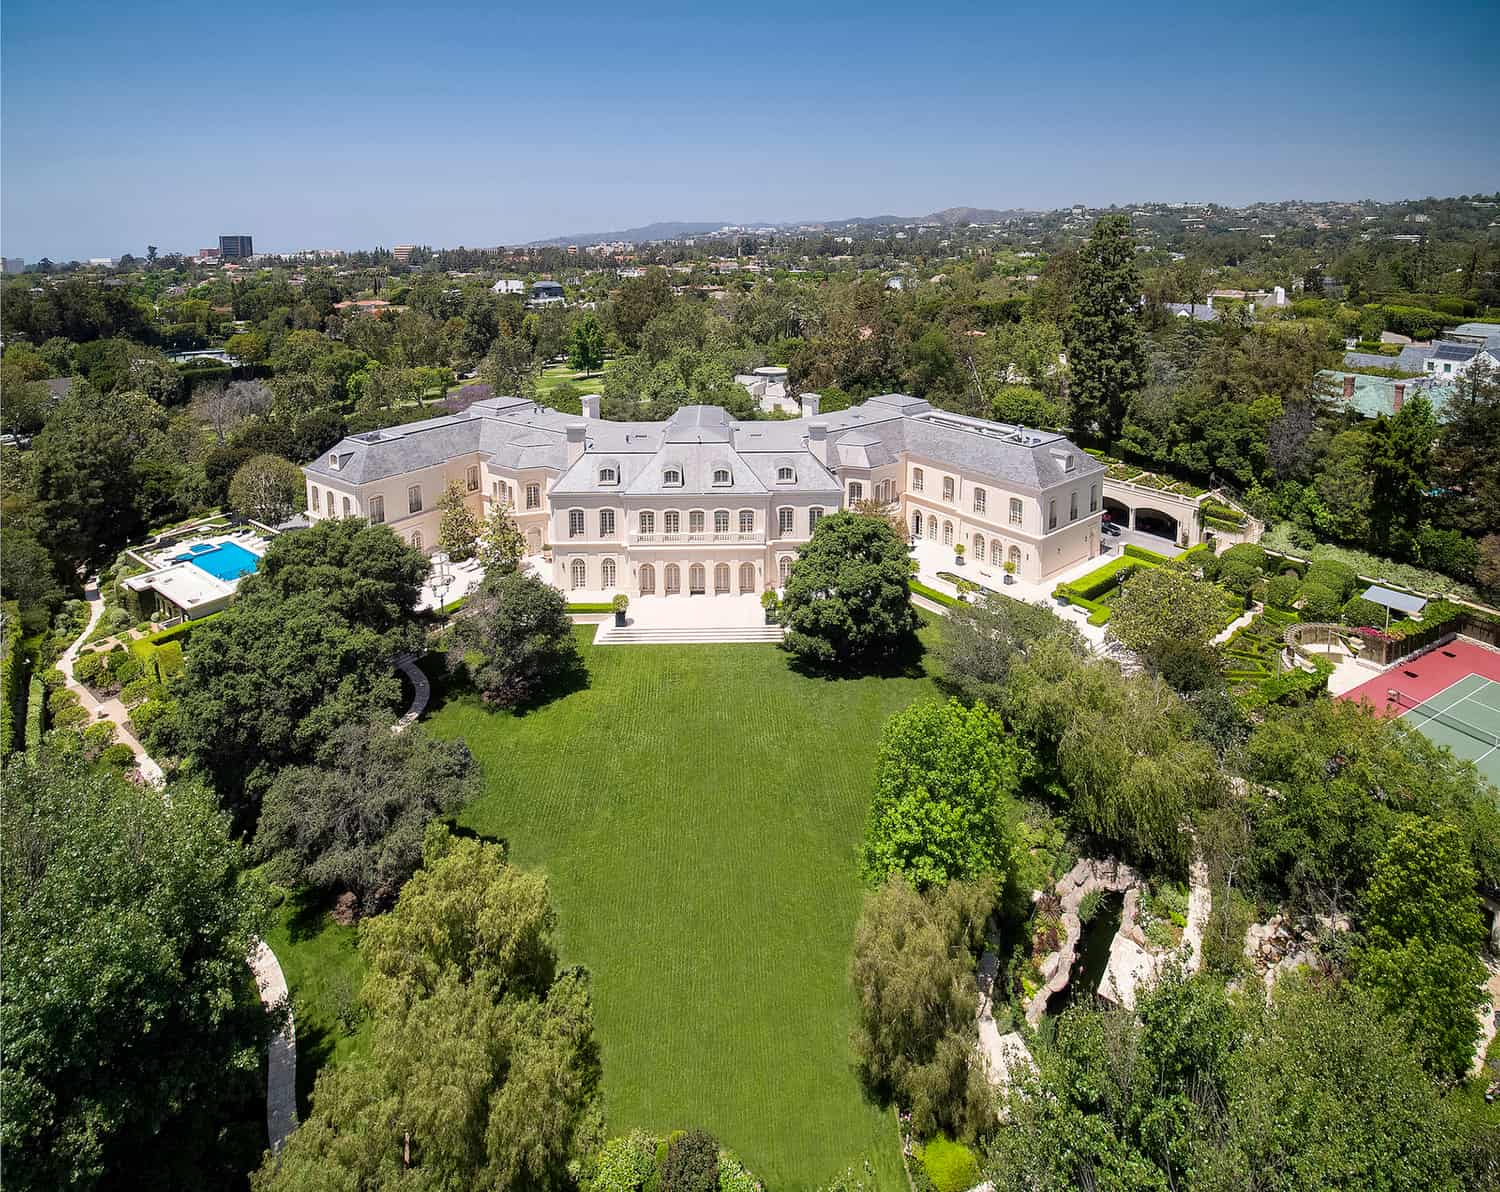 Spelling Manor in Holmby Hills